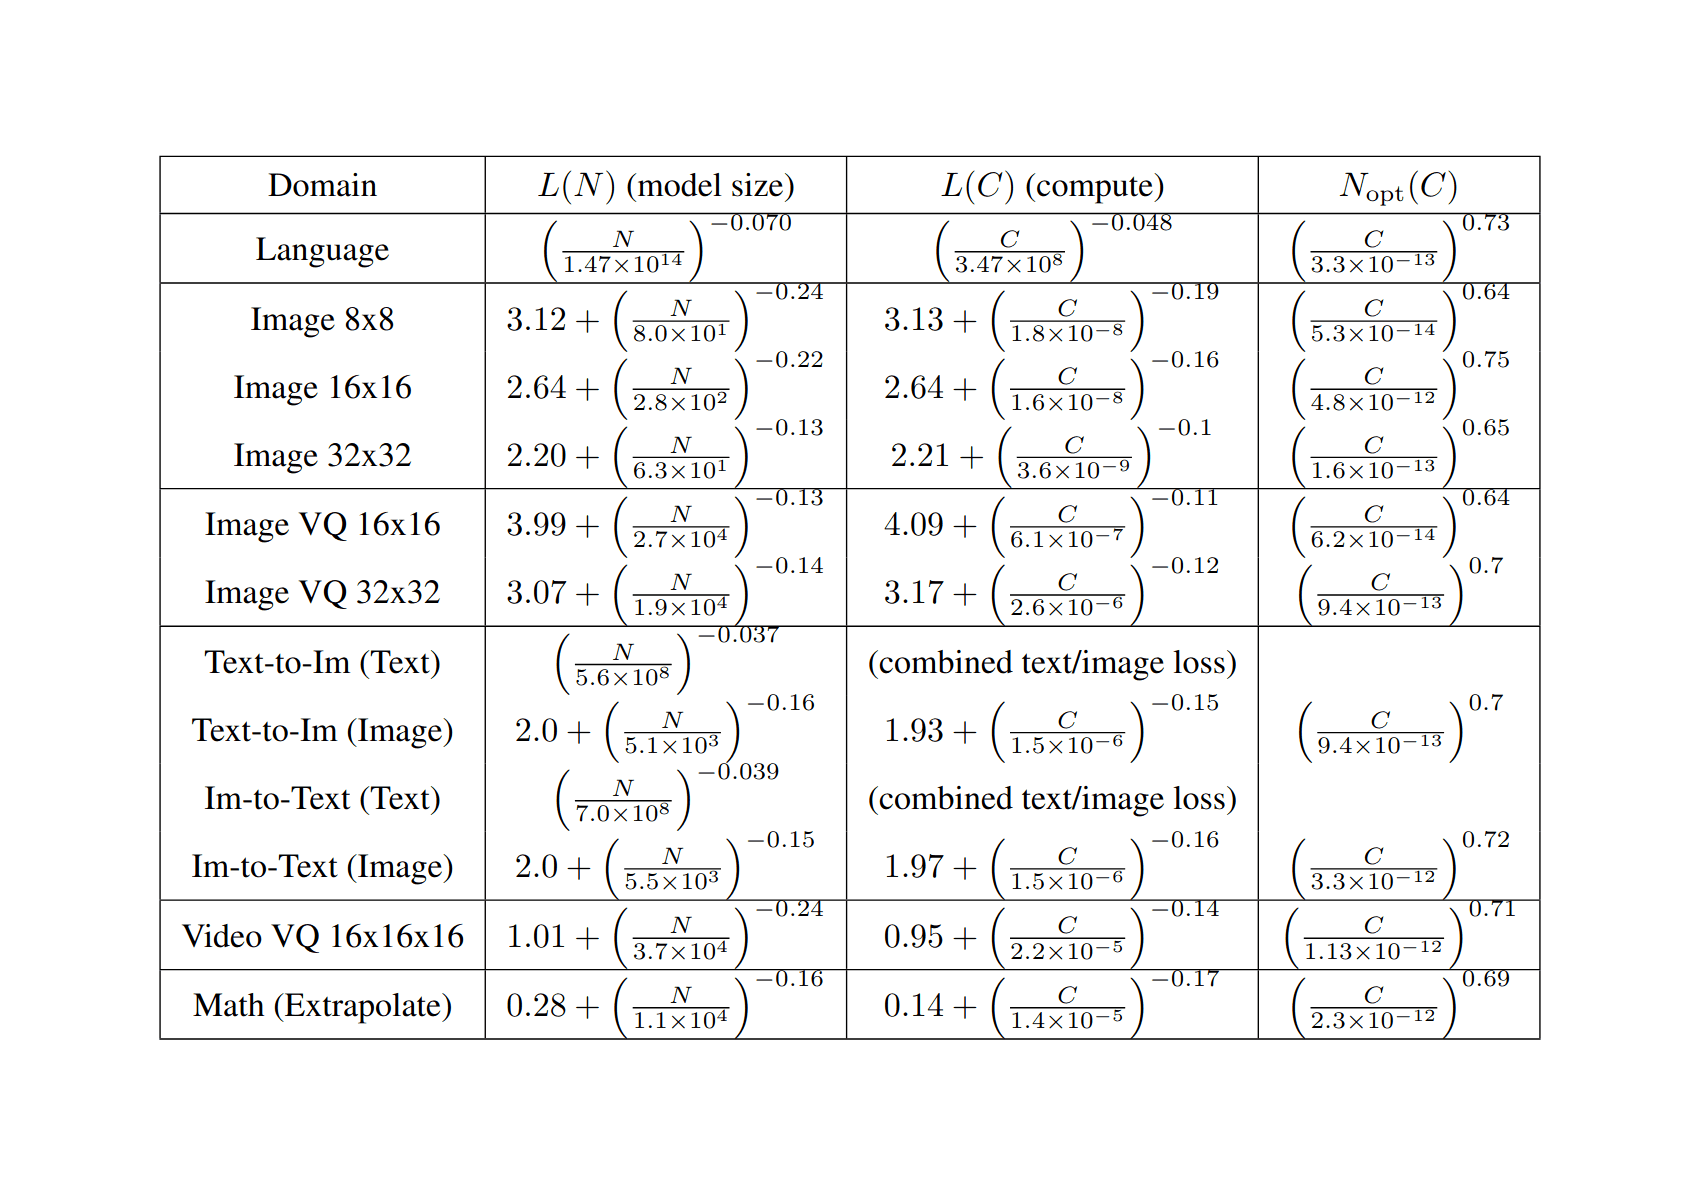 Table 1: Summary of scaling laws—In this table we summarize the model size and compute scaling fits to equation (1.1) along with Nopt(C), with the loss in nats/​​token, and compute measured in petaflop-days. In most cases the irreducible losses match quite well between model size and compute scaling laws. The math compute scaling law may be affected by the use of weight decay, which typically hurts performance early in training and improves performance late in training. The compute scaling results and data for language are from [BMR+20], while Nopt(C)comes from [KMH+20]. Unfortunately, even with data from the largest language models we cannot yet obtain a meaningful estimate for the entropy of natural language. [This is an updated scaling power law summary from Henighan et al 2020.]